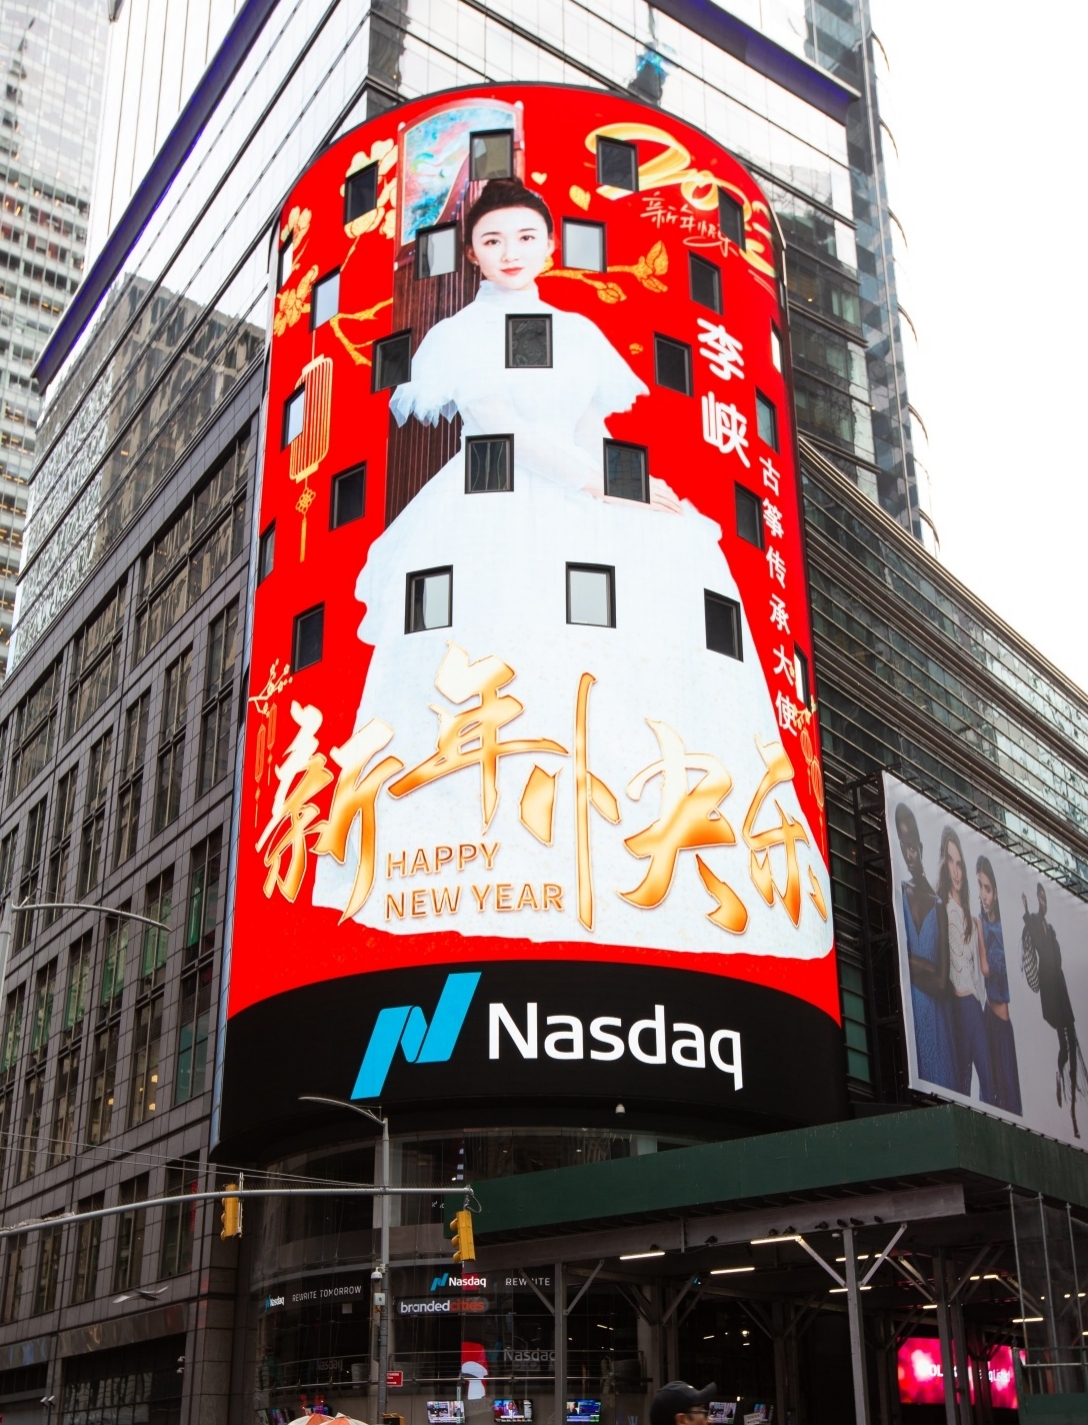 The outstanding representatives of Chinese zither landed in the Times Square in New York, the United States - NASDAQ big screen for broadcast